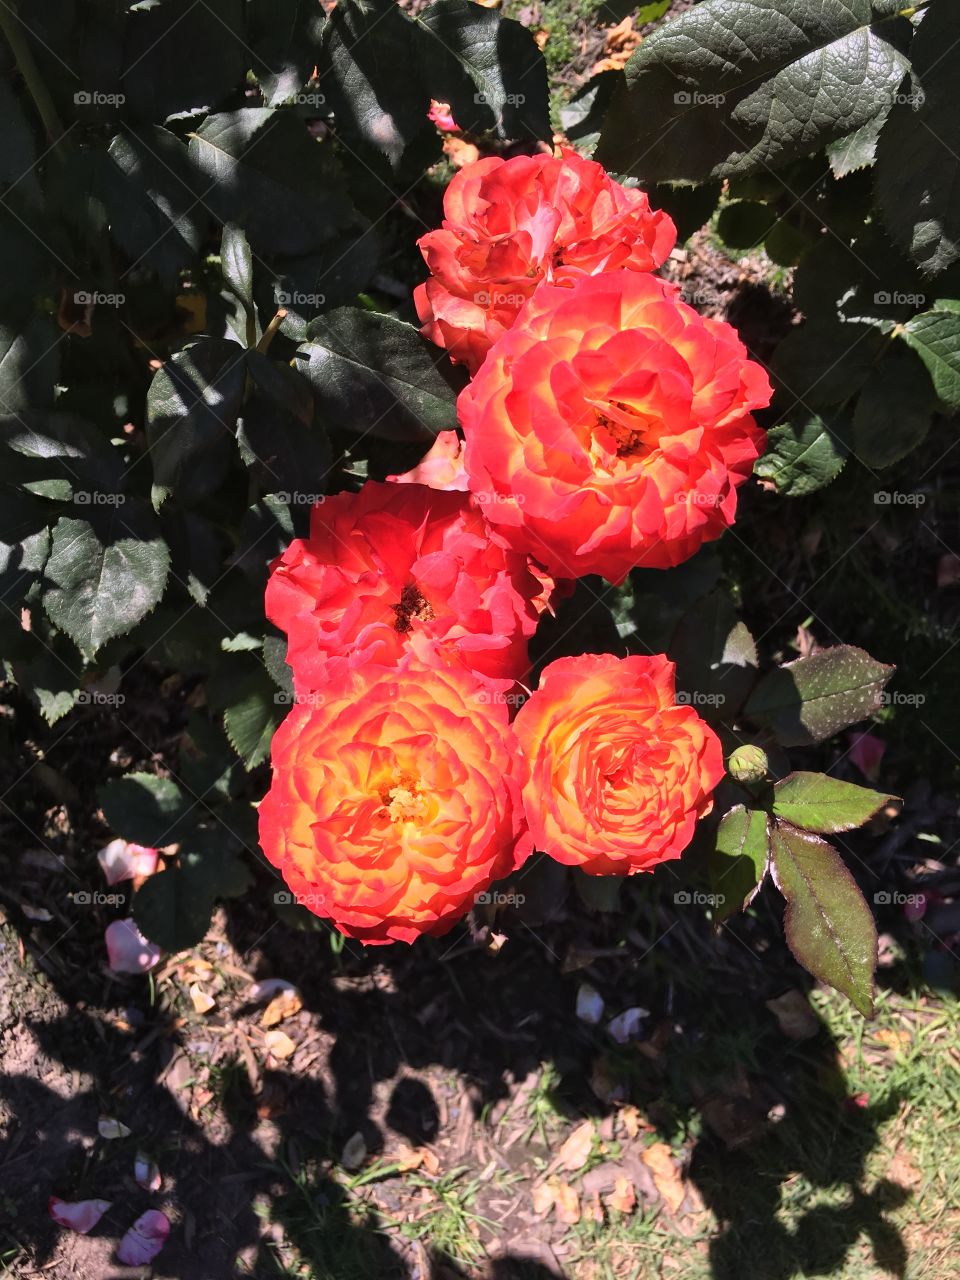 Portland Rose garden: Double shaded roses